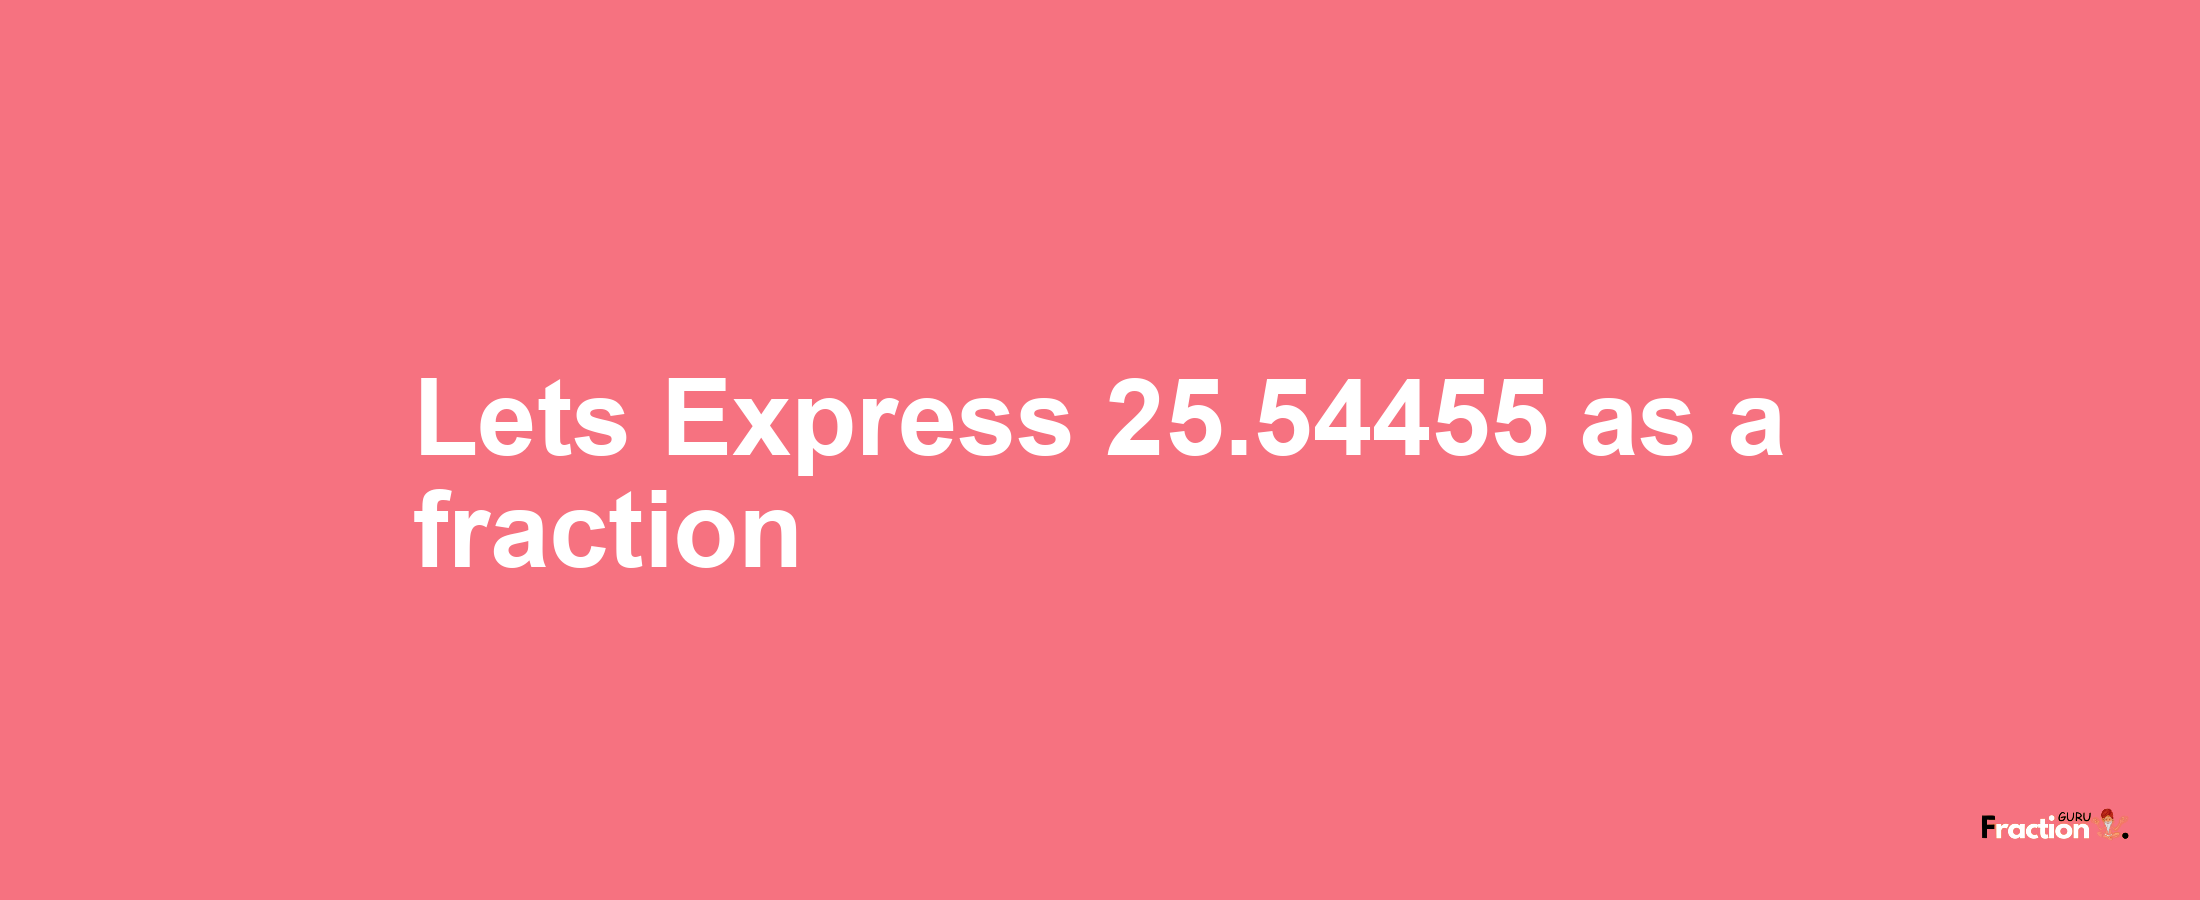 Lets Express 25.54455 as afraction